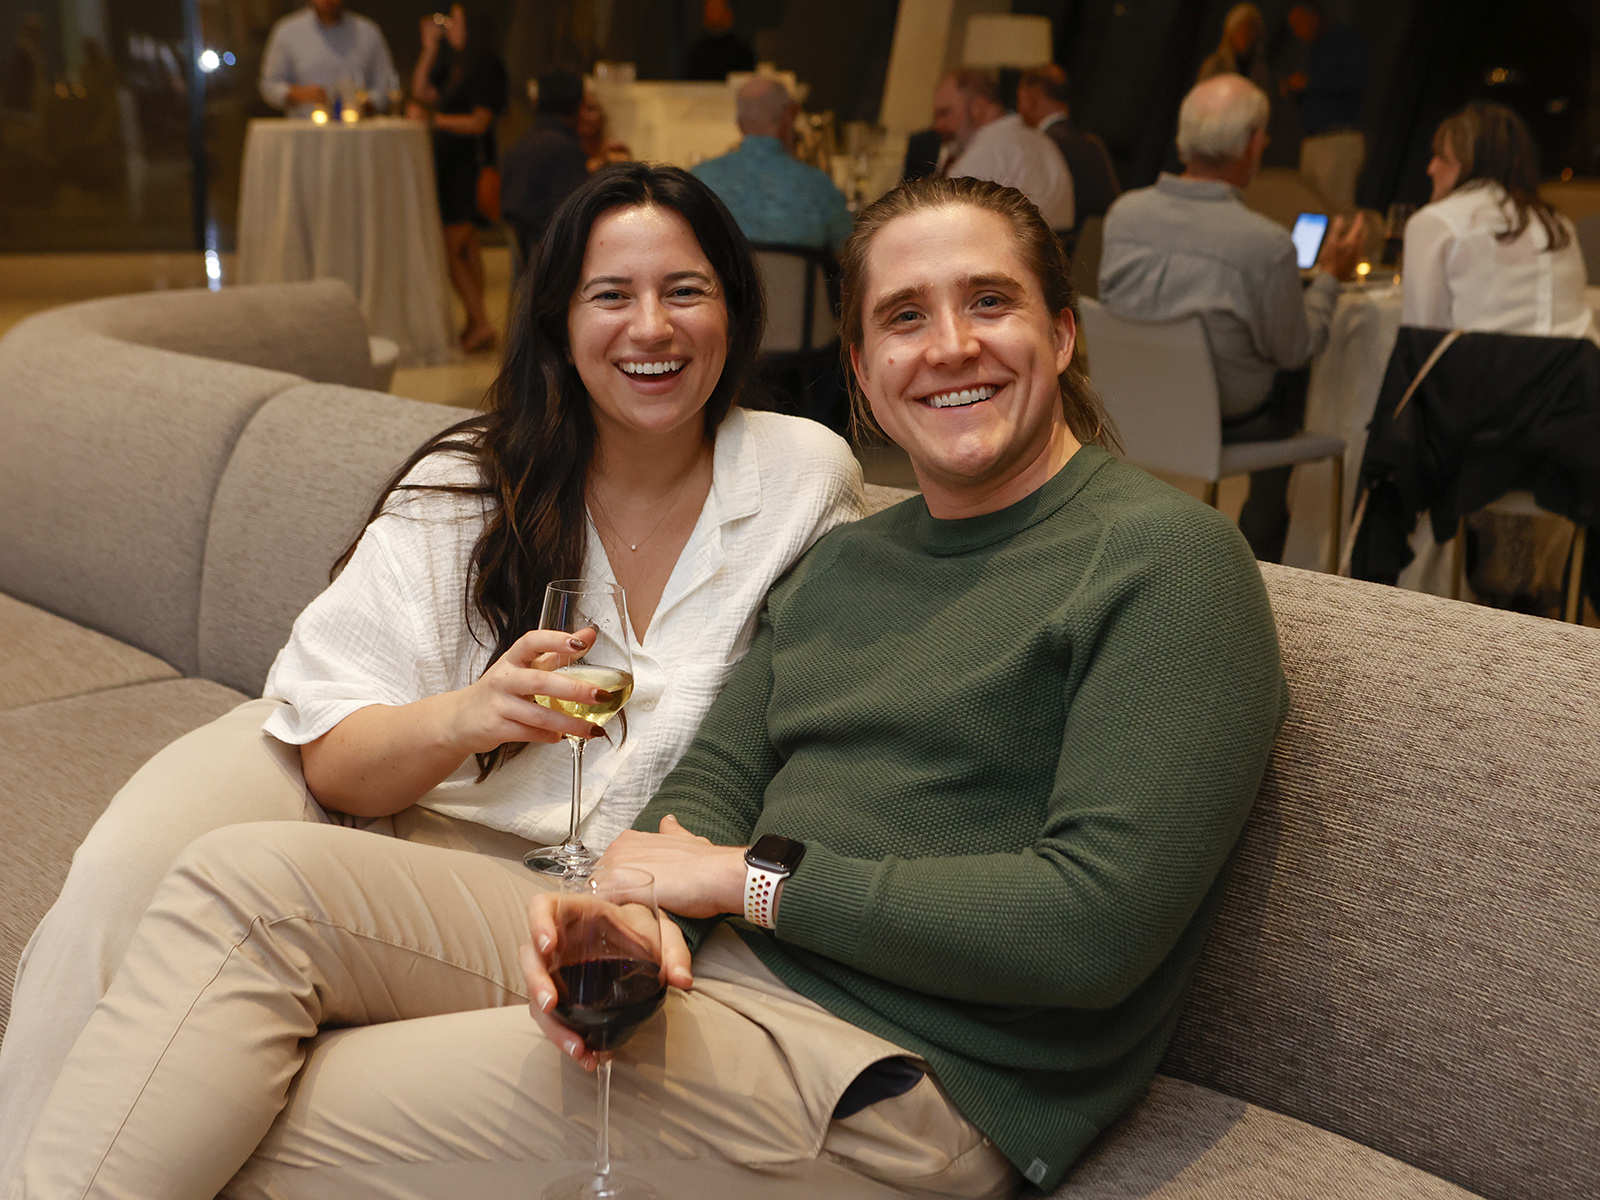 Photo of a man and woman smiling and holding wine glasses while seated on a gray couch in the Cultural Living Room.